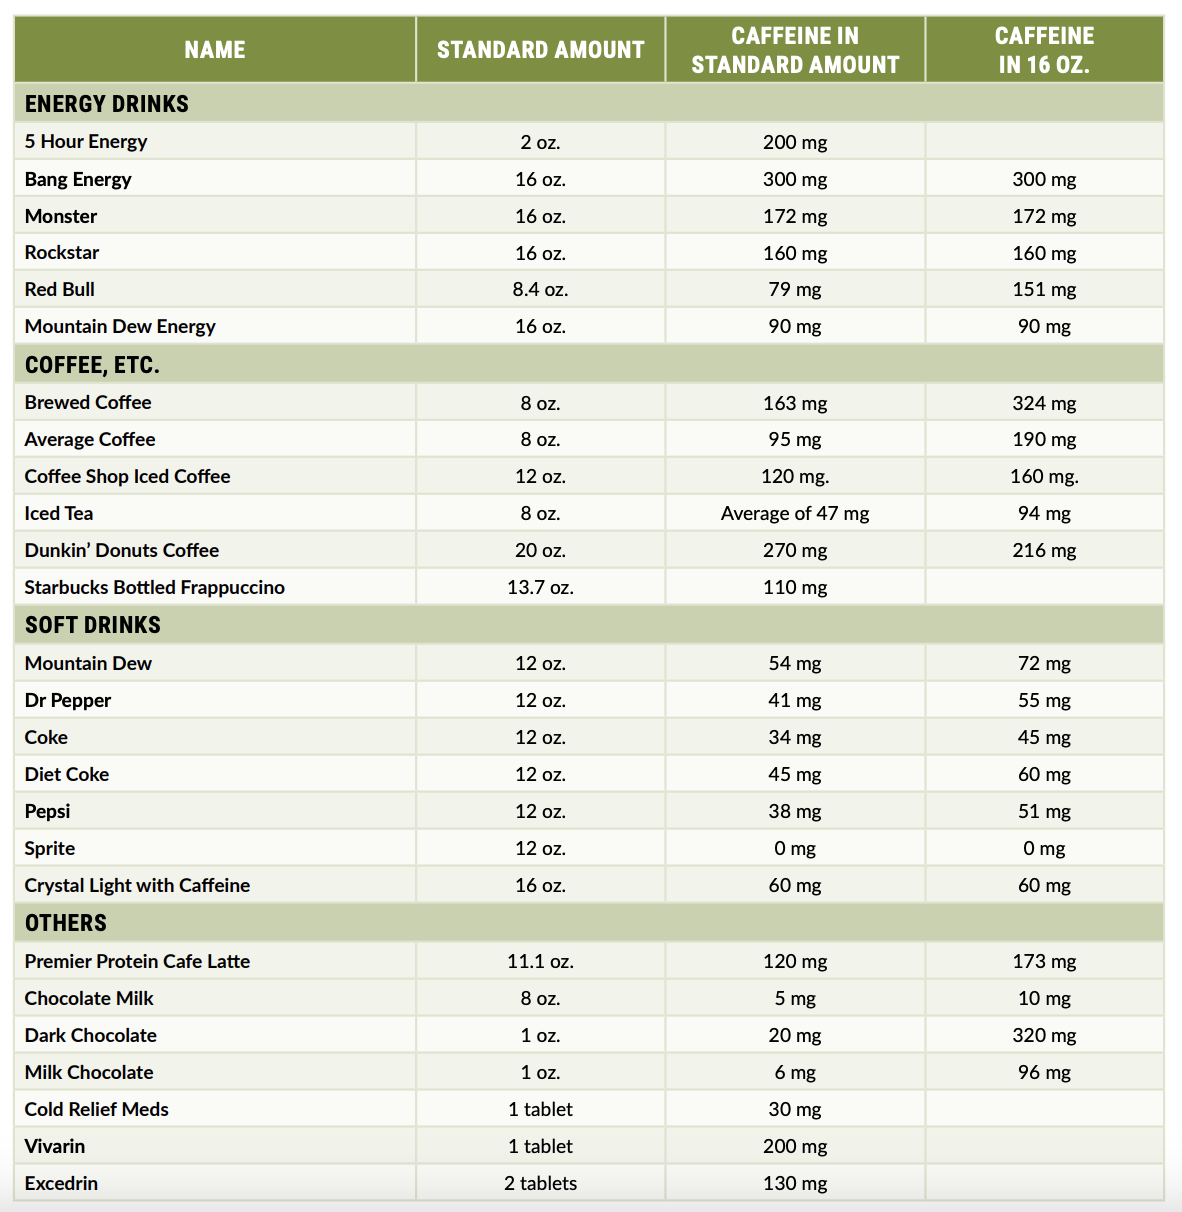 common drinks and their caffiene levels